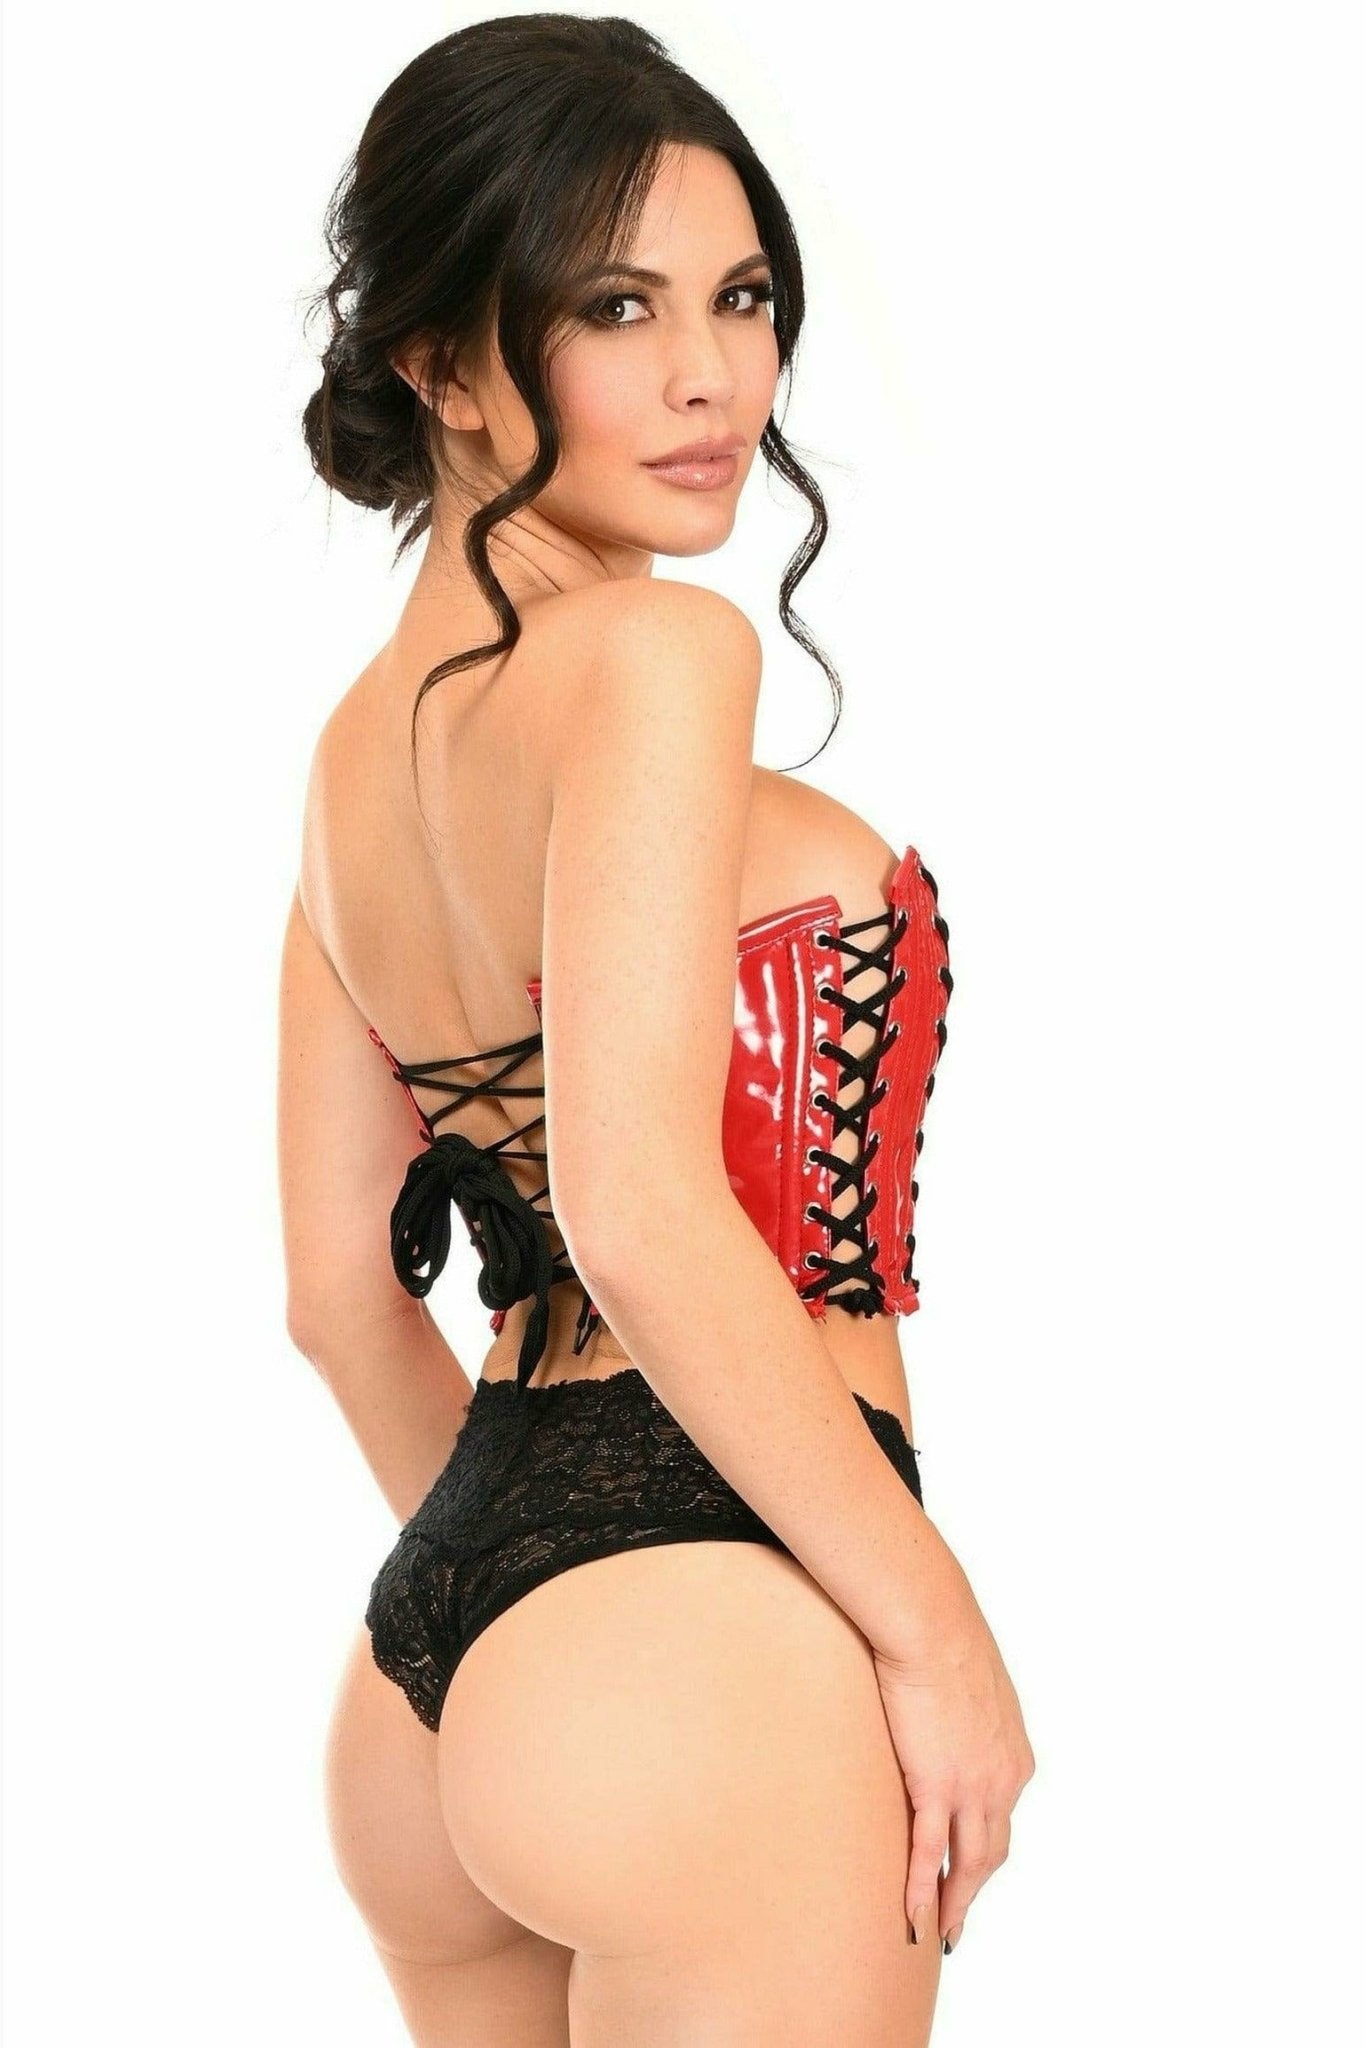 Sexy Red Patent with Black Lacing Lace-Up Bustier Musotica.com